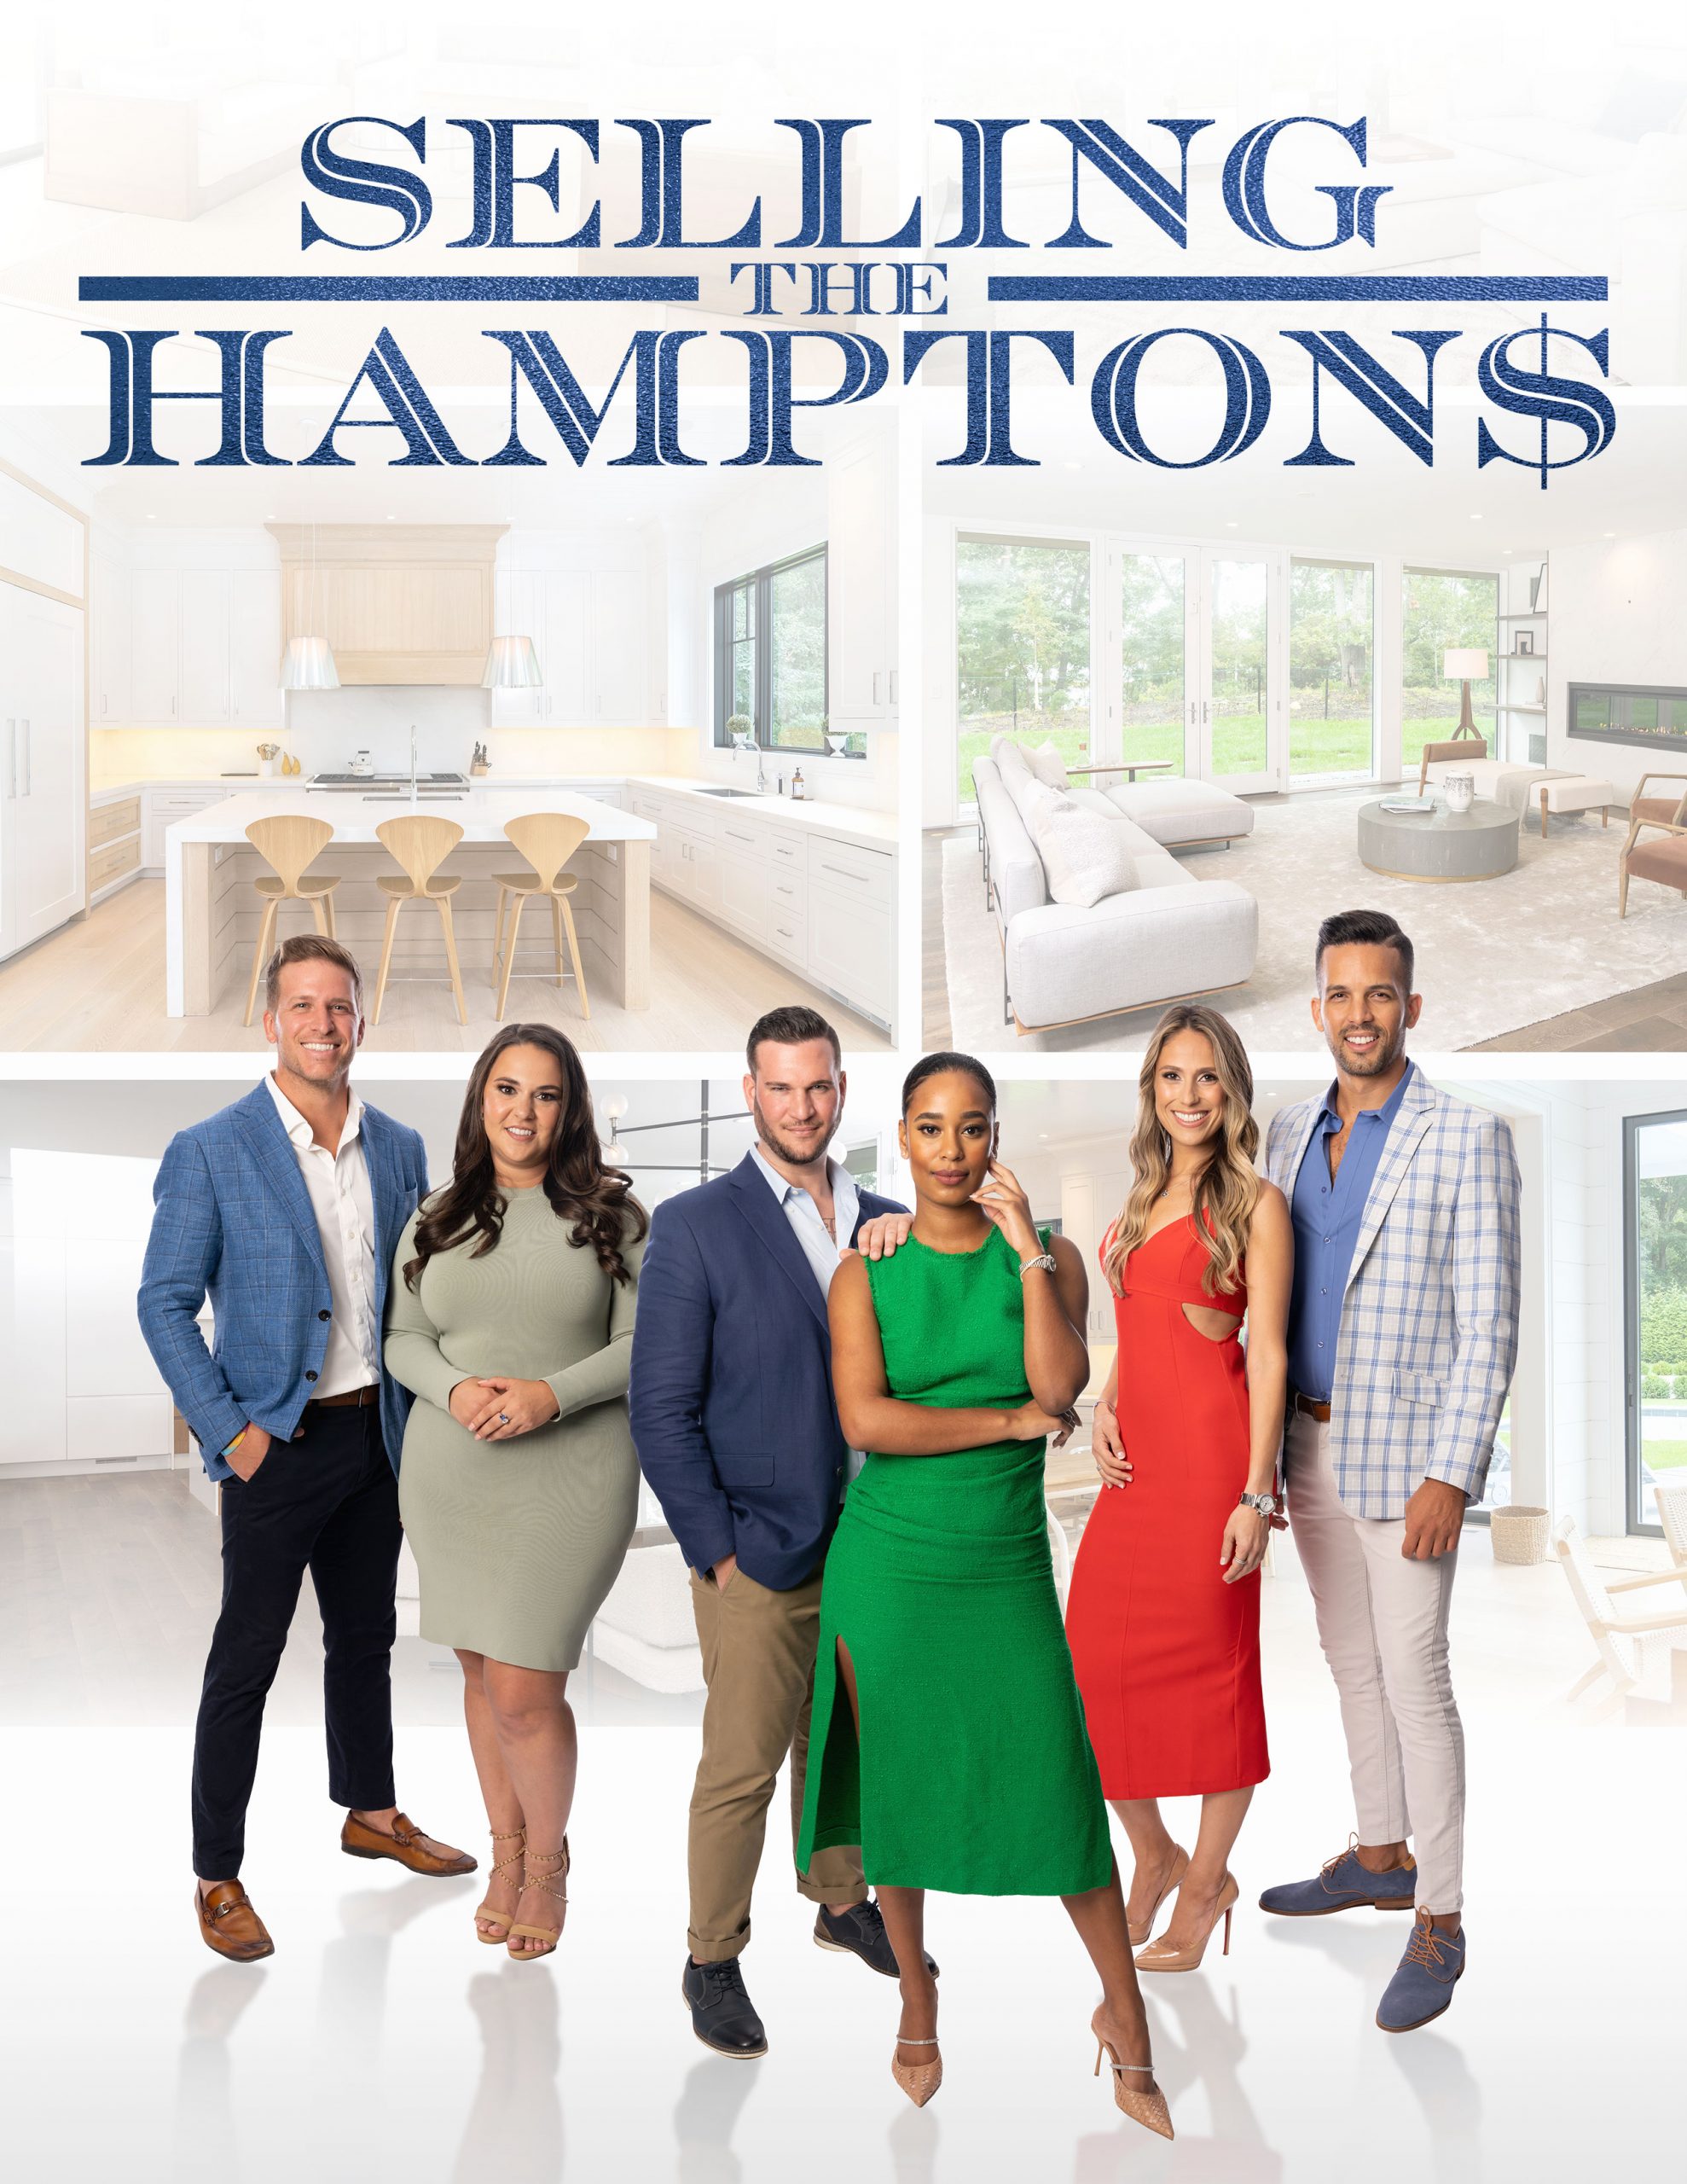 ‘Selling the Hamptons’ Trailer Teases 'Fierce' Competition in a 'Chic' Real Estate Scene